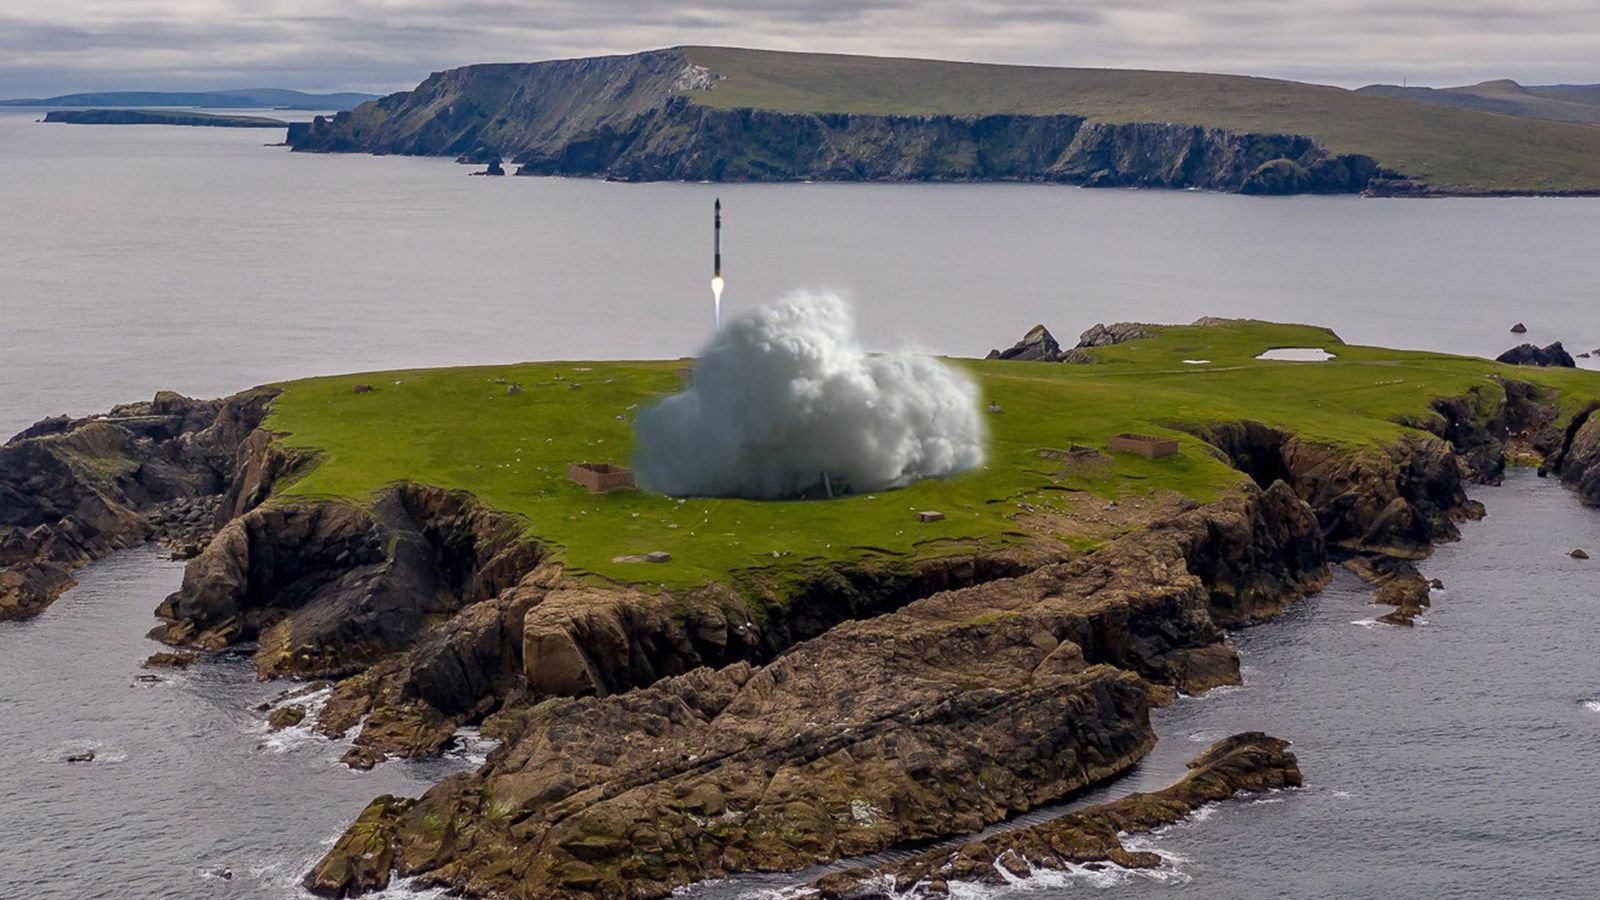 Shetland's SaxaVord Spaceport granted licence for UK's first vertical rocket launch